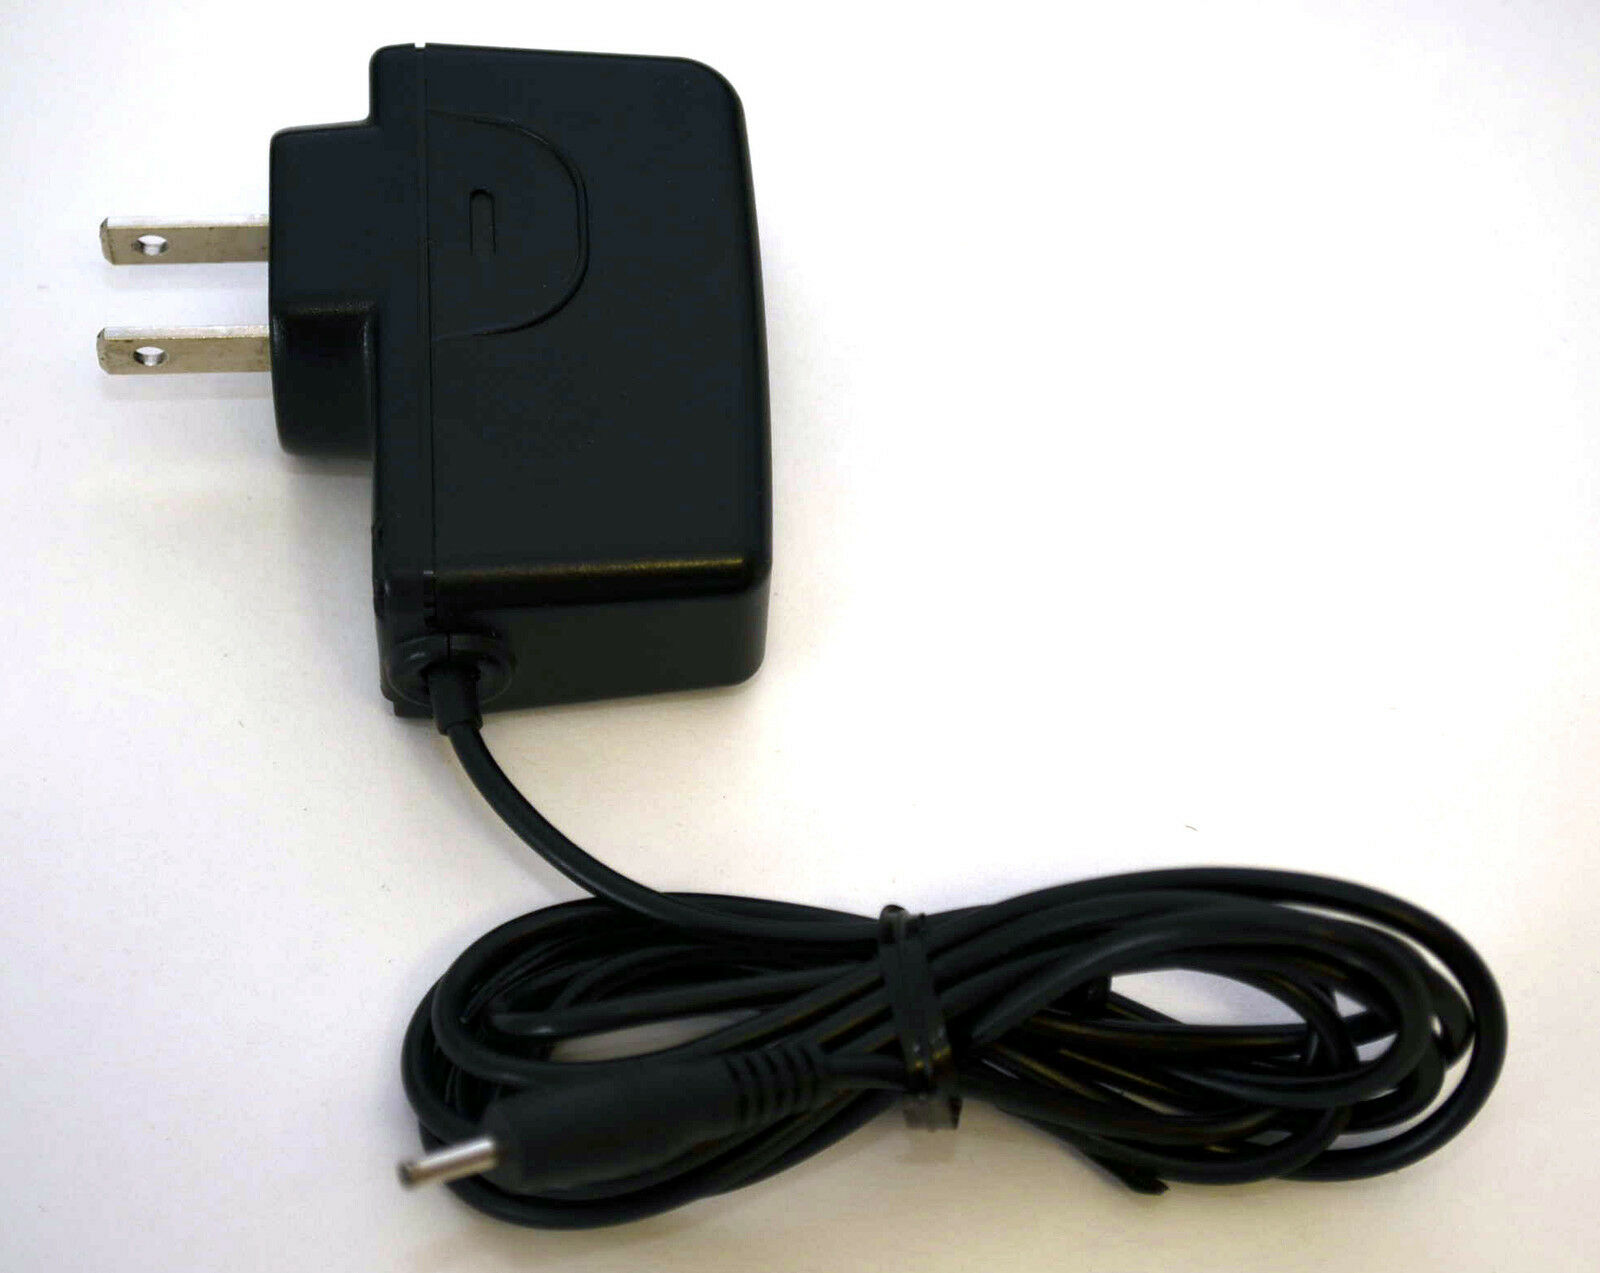 NEW Power Adapter CHARGER for Microsoft XBox 360 LIVE Wireless Headset slim home ac adapter